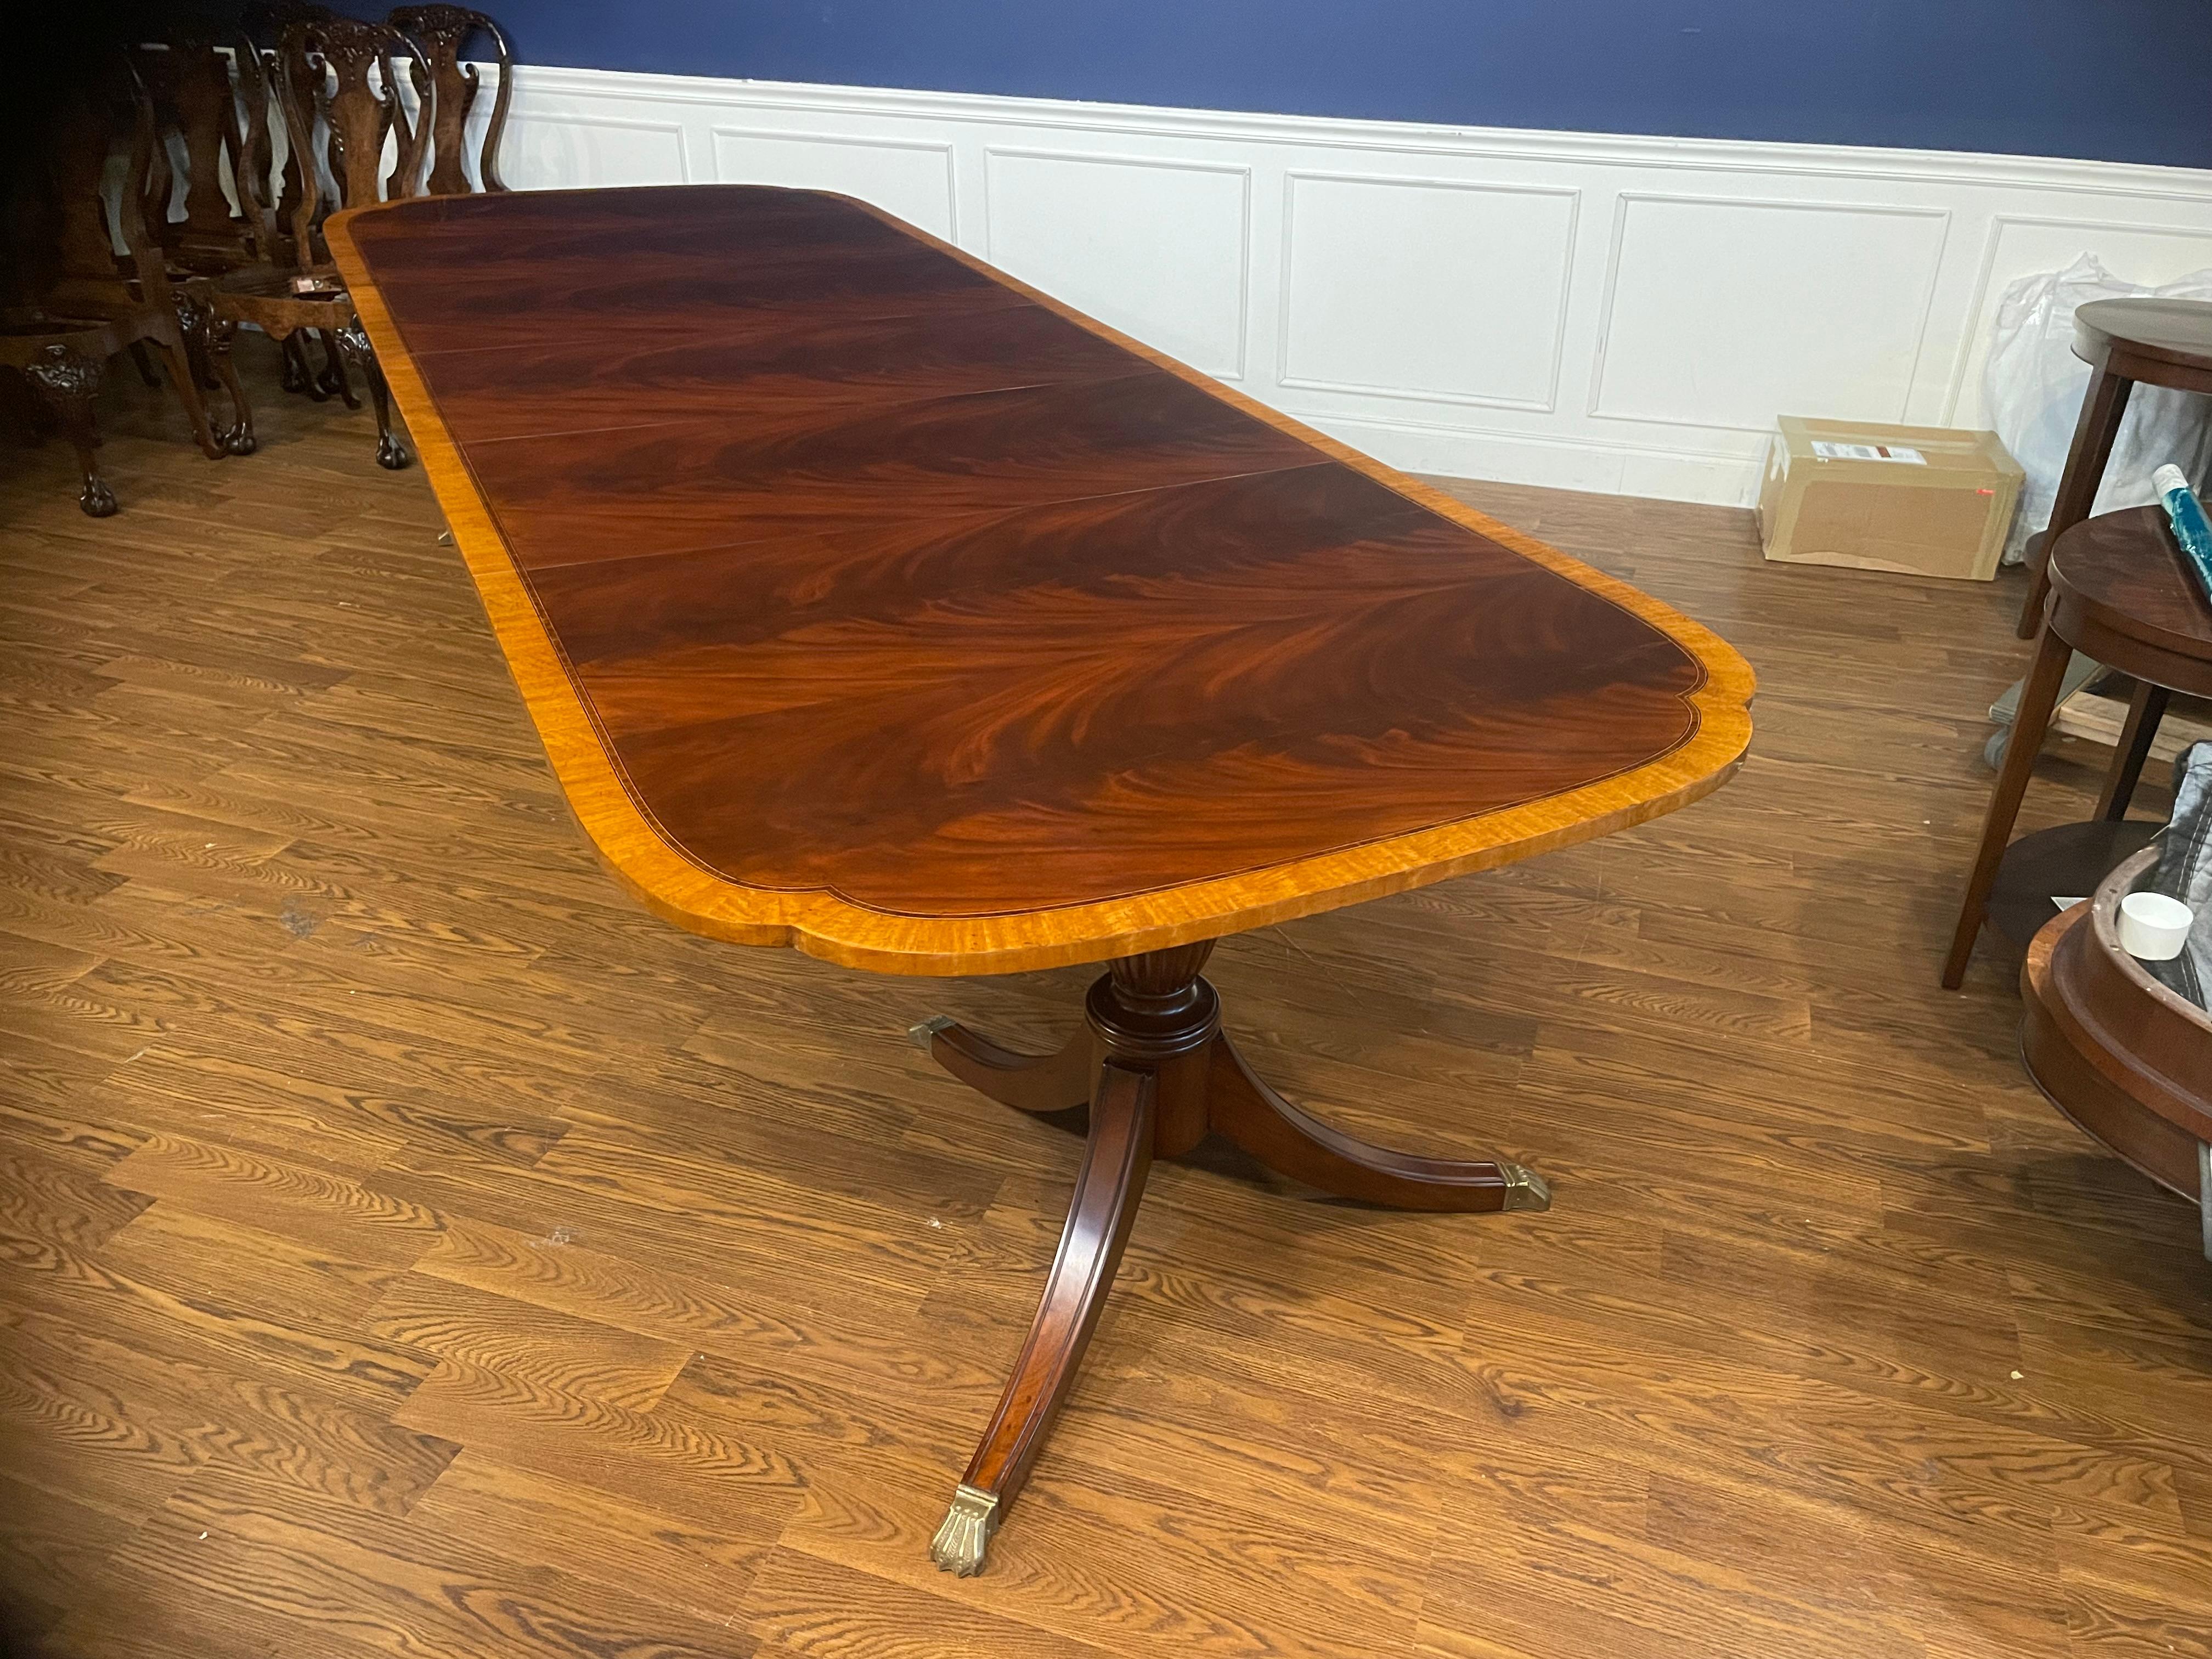 This is our traditional mahogany scallop cornered dining table. The highlight of this table is the elegantly shaped scalloped corners. It features a field of slip-matched swirly crotch mahogany from West Africa and a satinwood border from South